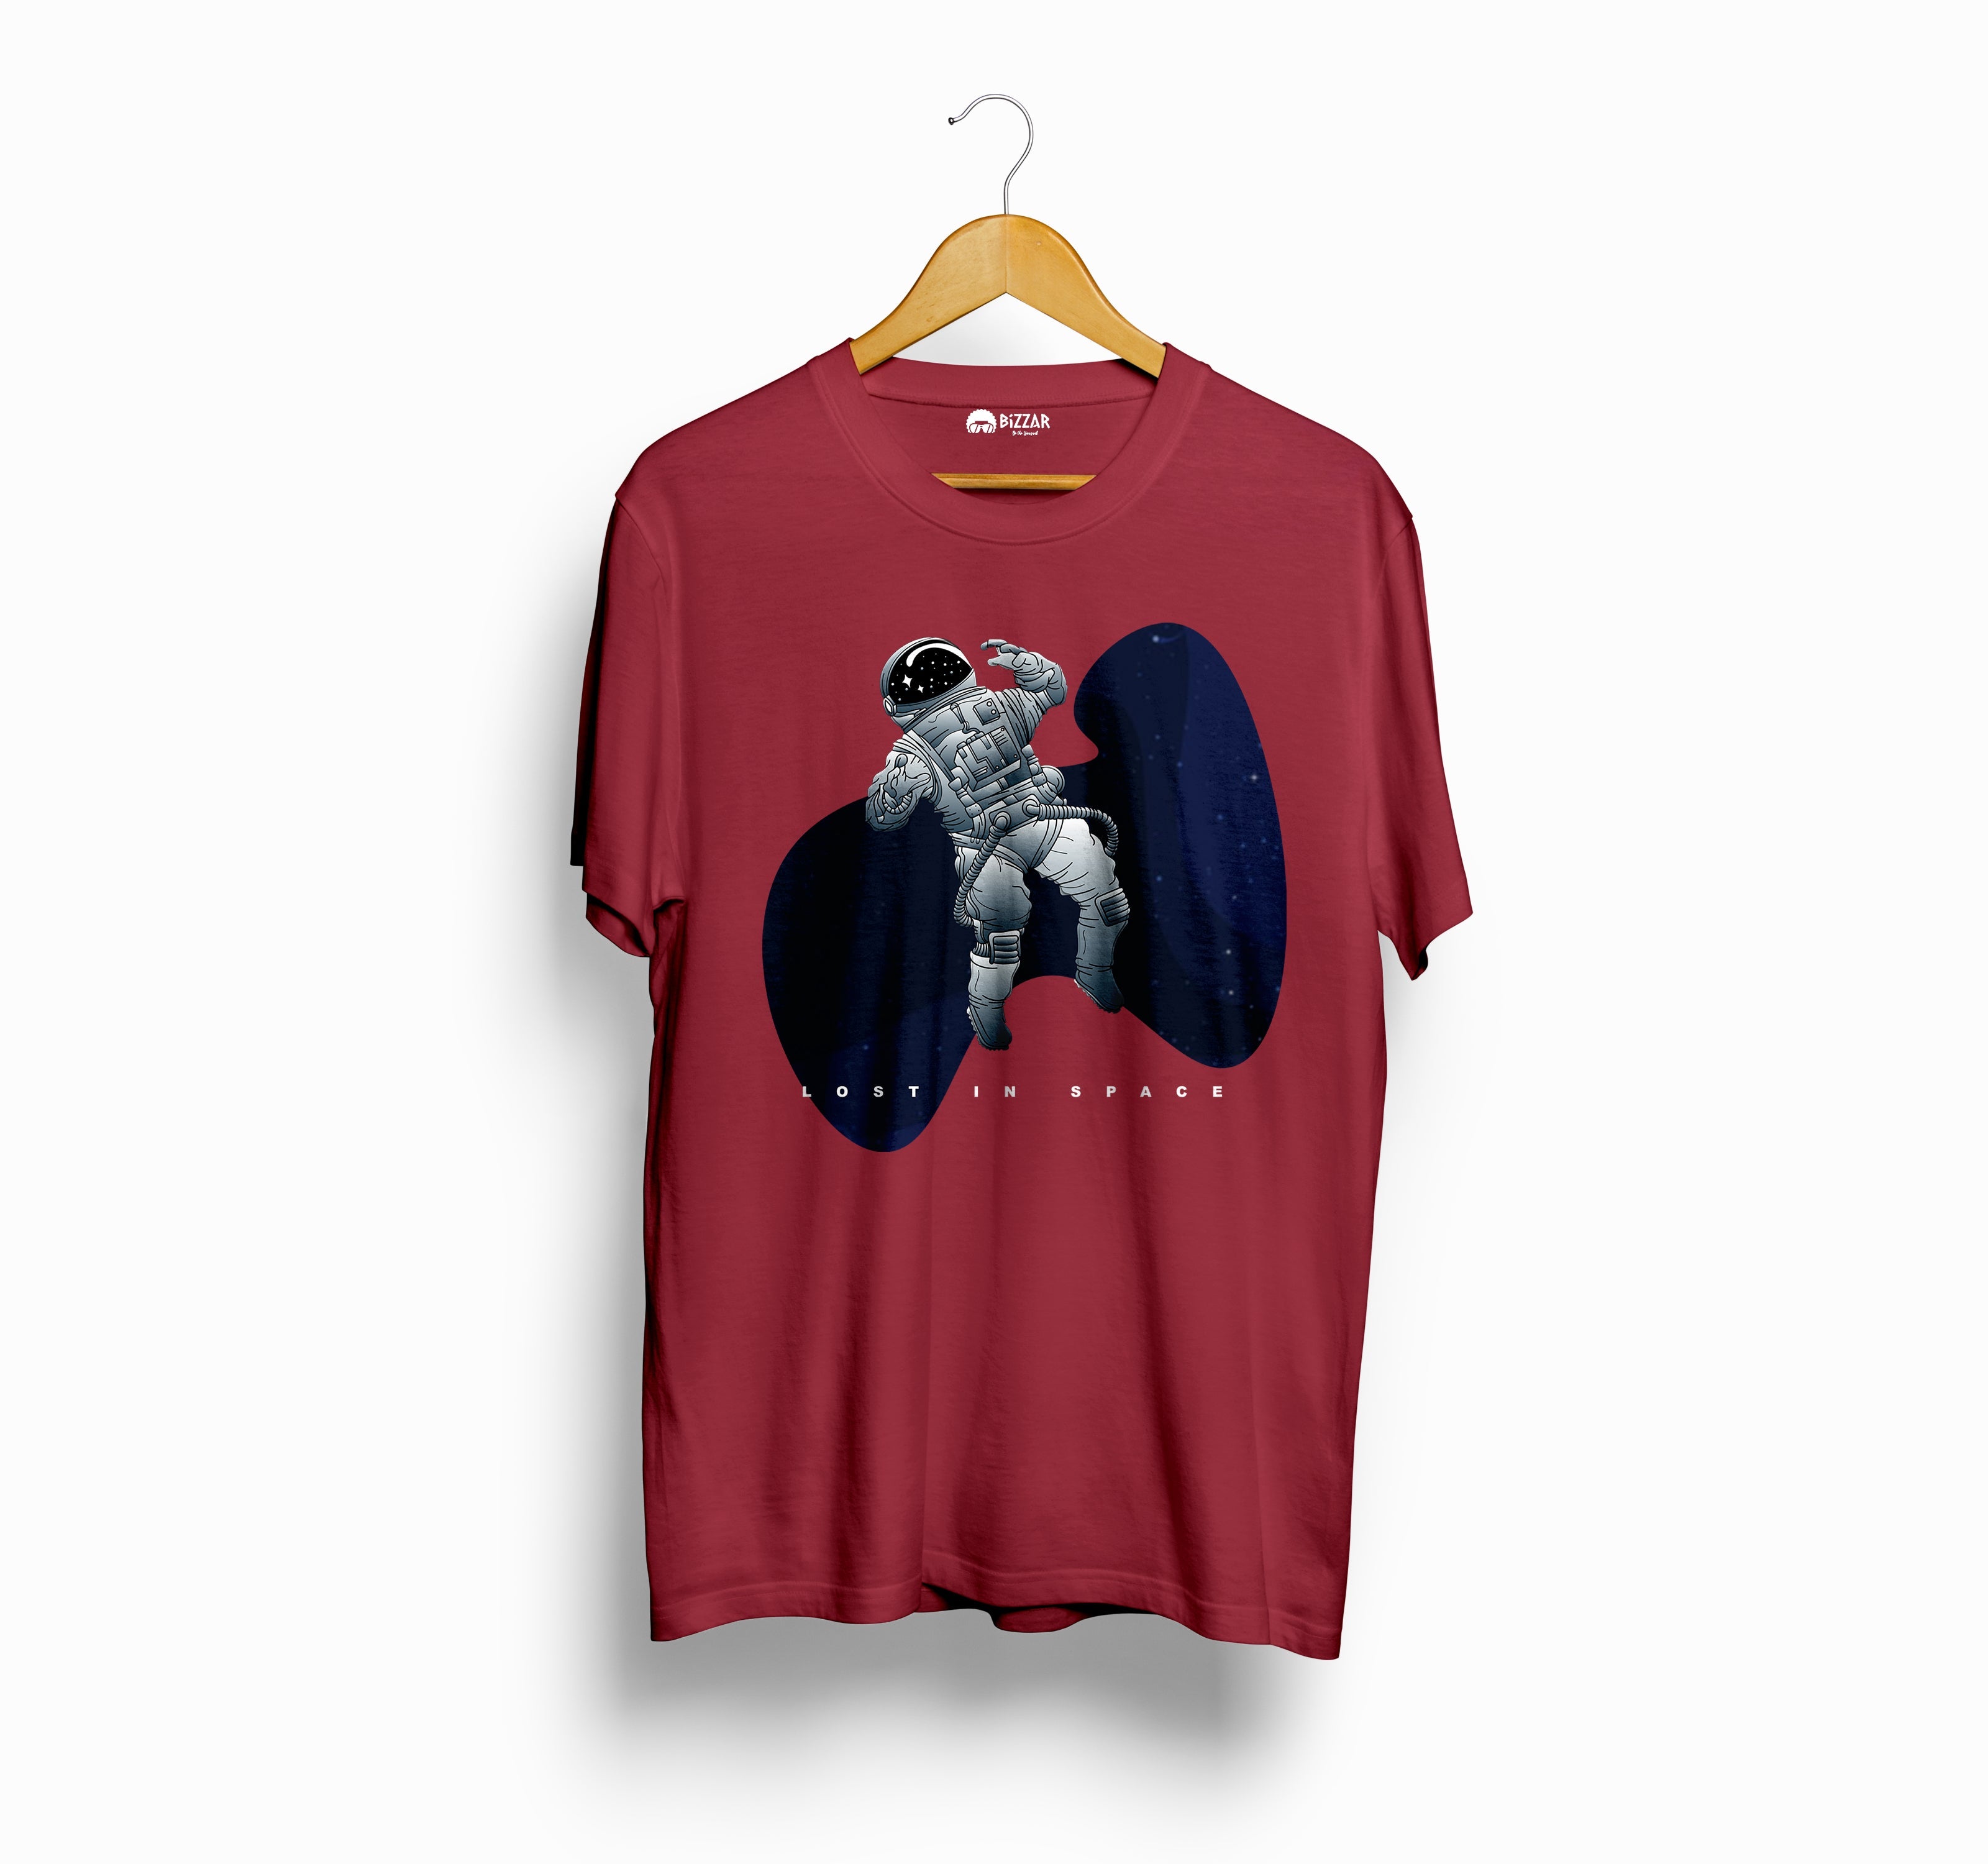 Bizzar's Lost in Space Maroon T-Shirt